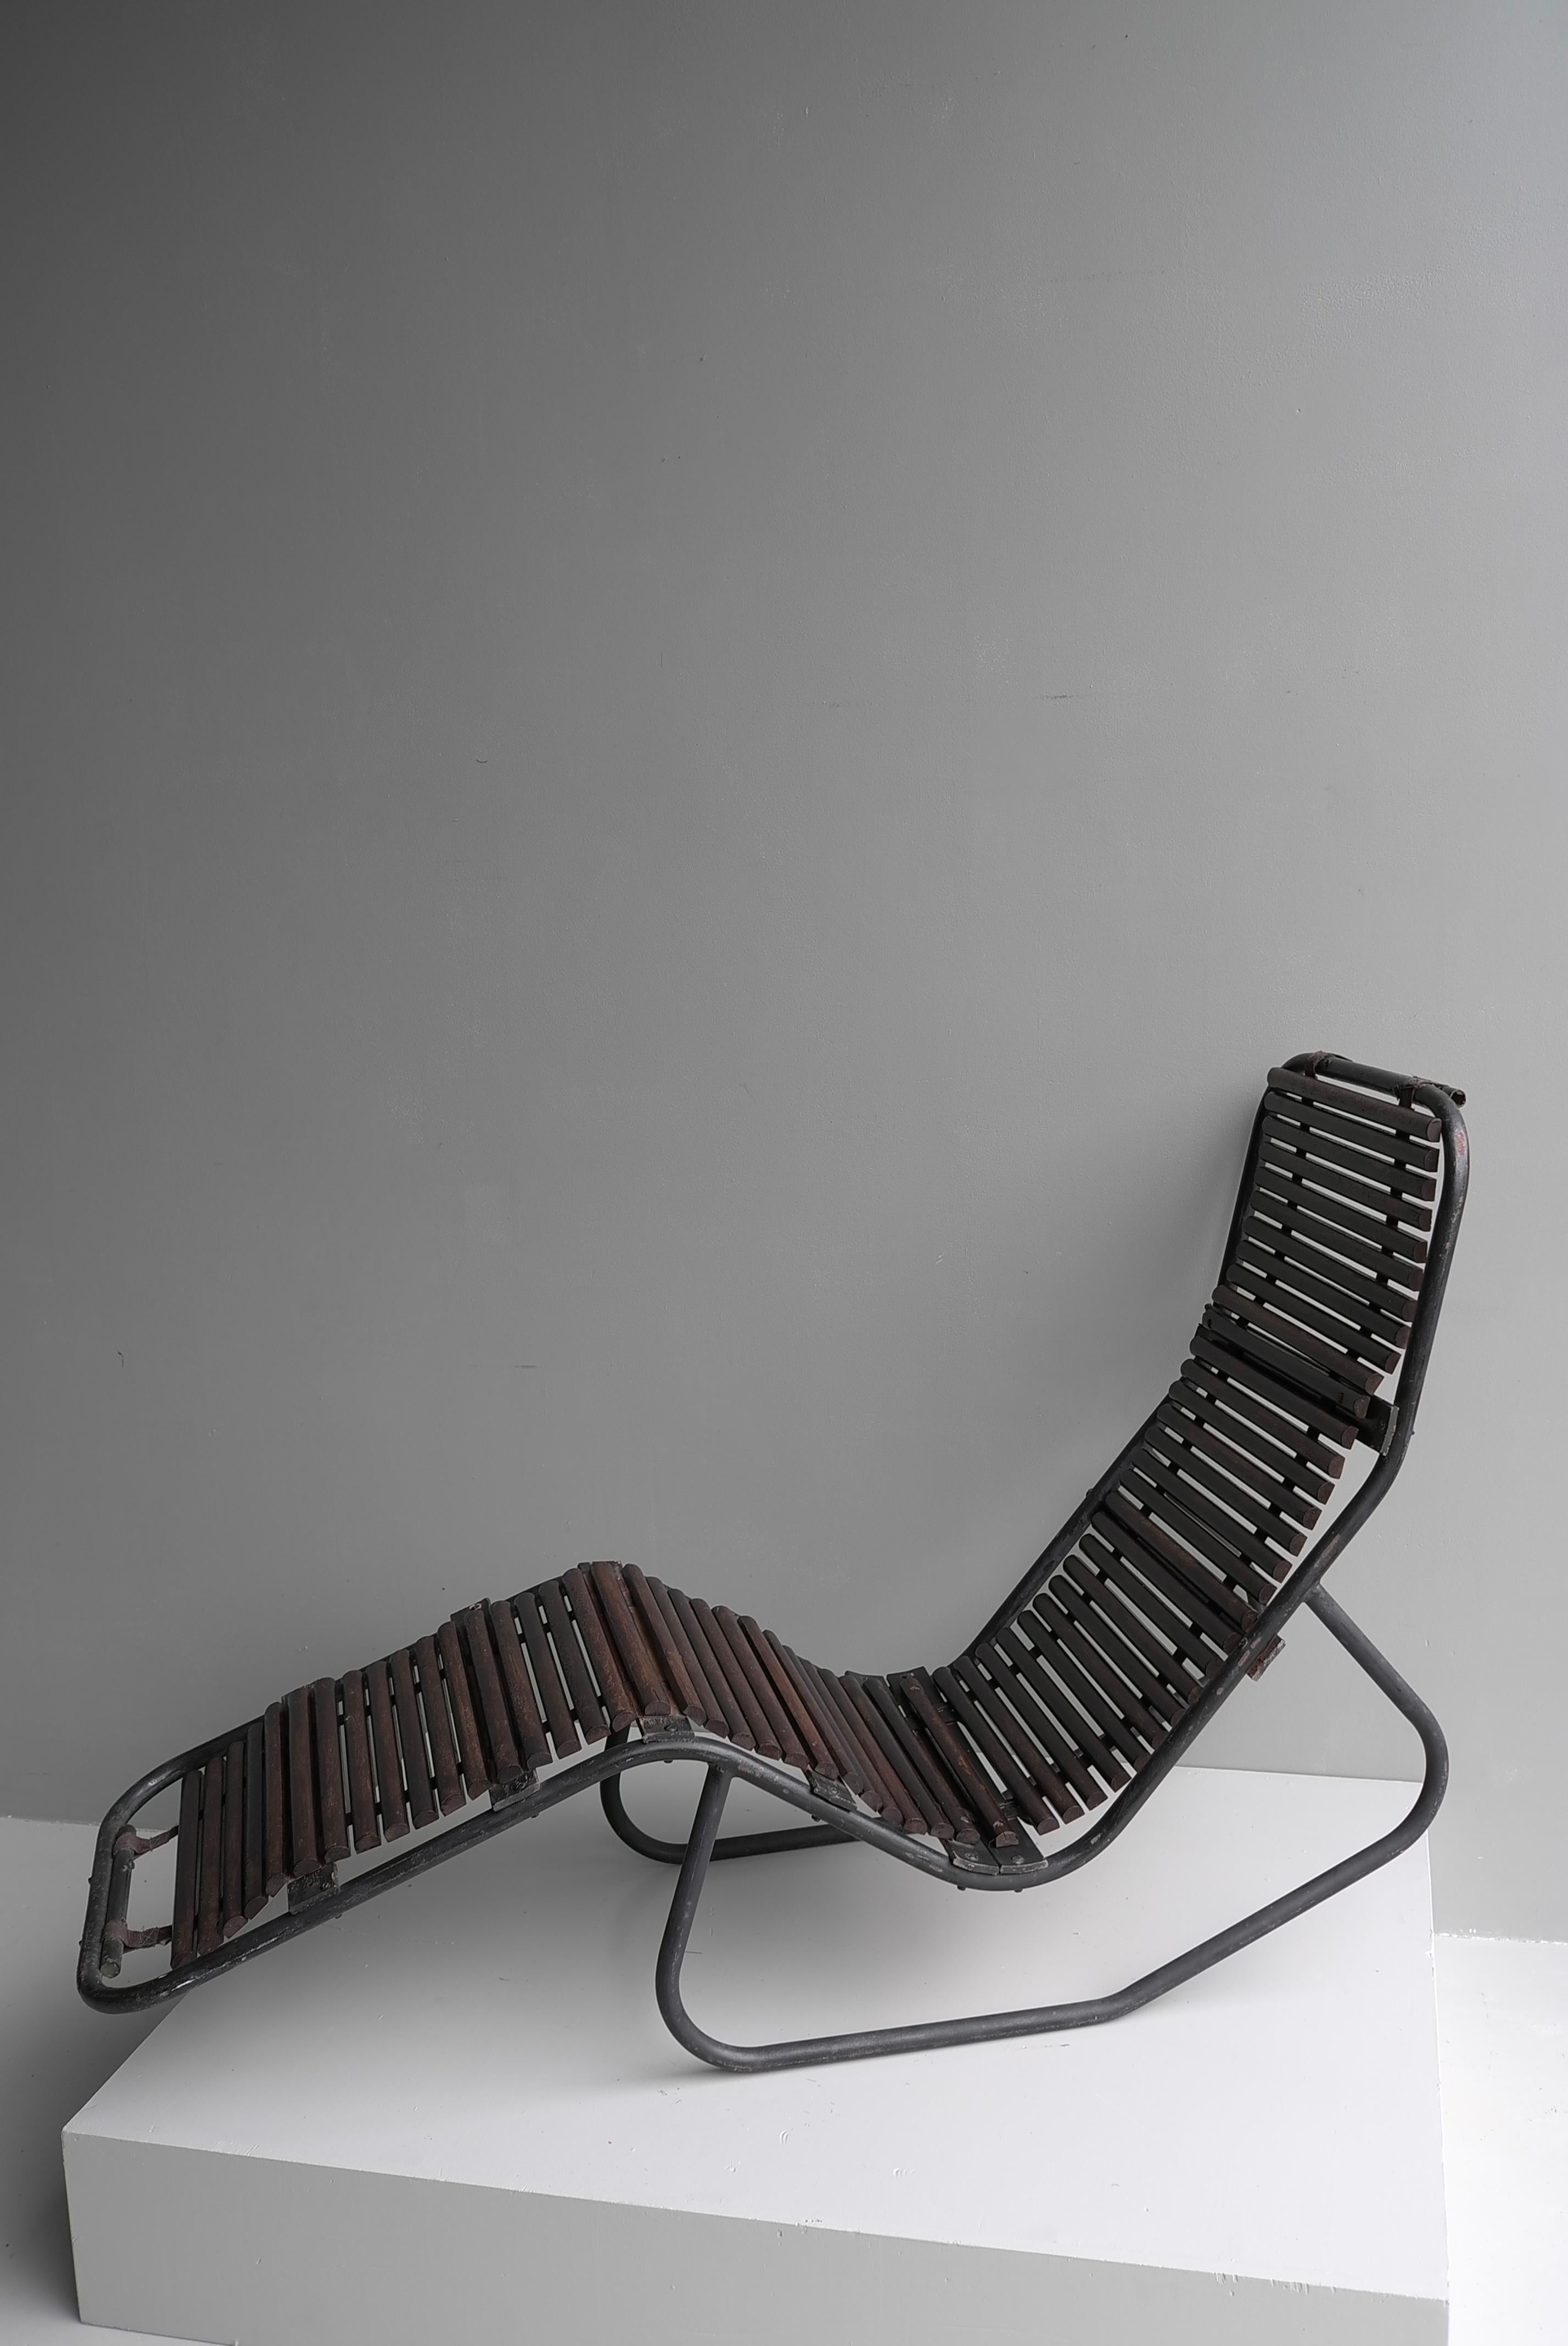 Tubular steel and Hardwood Chaise longue, France 1940's For Sale 3